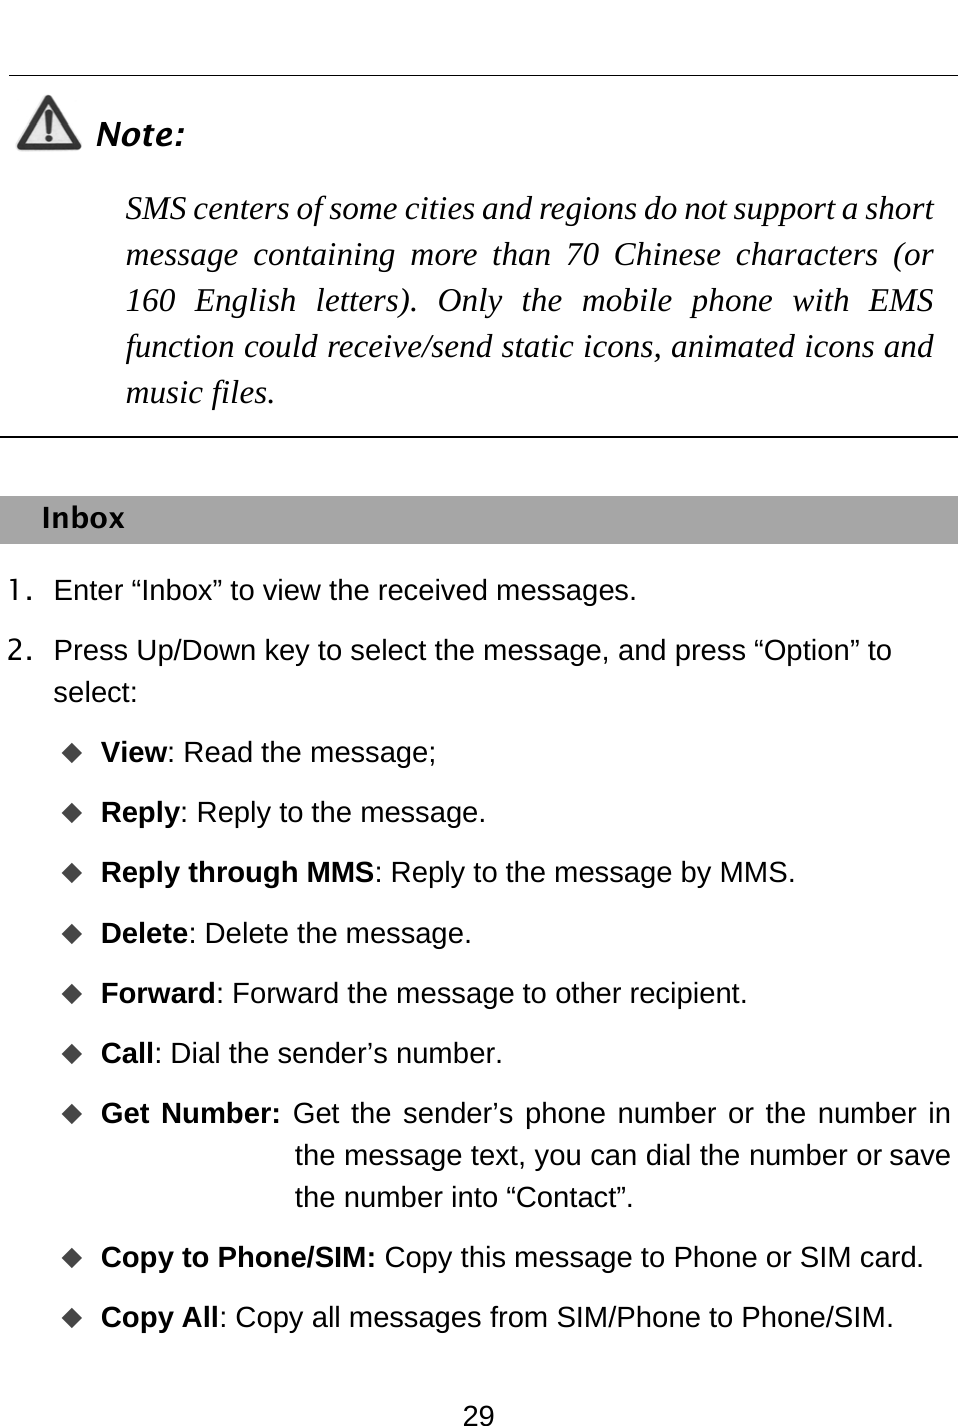  29  Note: SMS centers of some cities and regions do not support a short message containing more than 70 Chinese characters (or 160 English letters). Only the mobile phone with EMS function could receive/send static icons, animated icons and music files.  Inbox 1.  Enter “Inbox” to view the received messages. 2.  Press Up/Down key to select the message, and press “Option” to select:   View: Read the message;  Reply: Reply to the message.  Reply through MMS: Reply to the message by MMS.  Delete: Delete the message.  Forward: Forward the message to other recipient.  Call: Dial the sender’s number.  Get Number: Get the sender’s phone number or the number in the message text, you can dial the number or save the number into “Contact”.  Copy to Phone/SIM: Copy this message to Phone or SIM card.  Copy All: Copy all messages from SIM/Phone to Phone/SIM. 